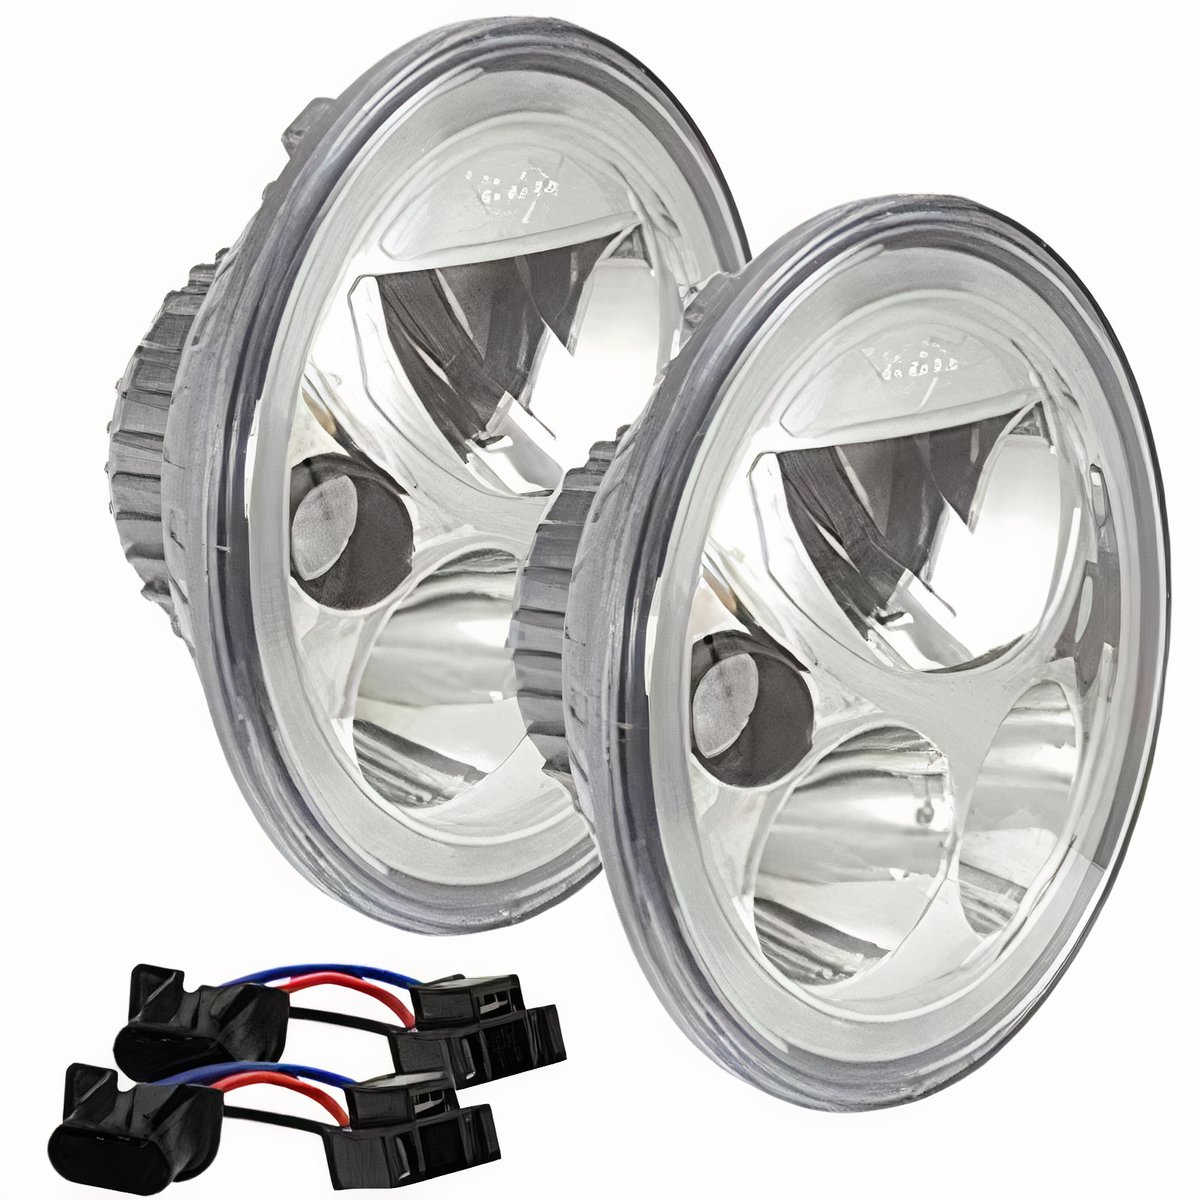 VisionX Vortex LED Headlights with Halo Ring - 7